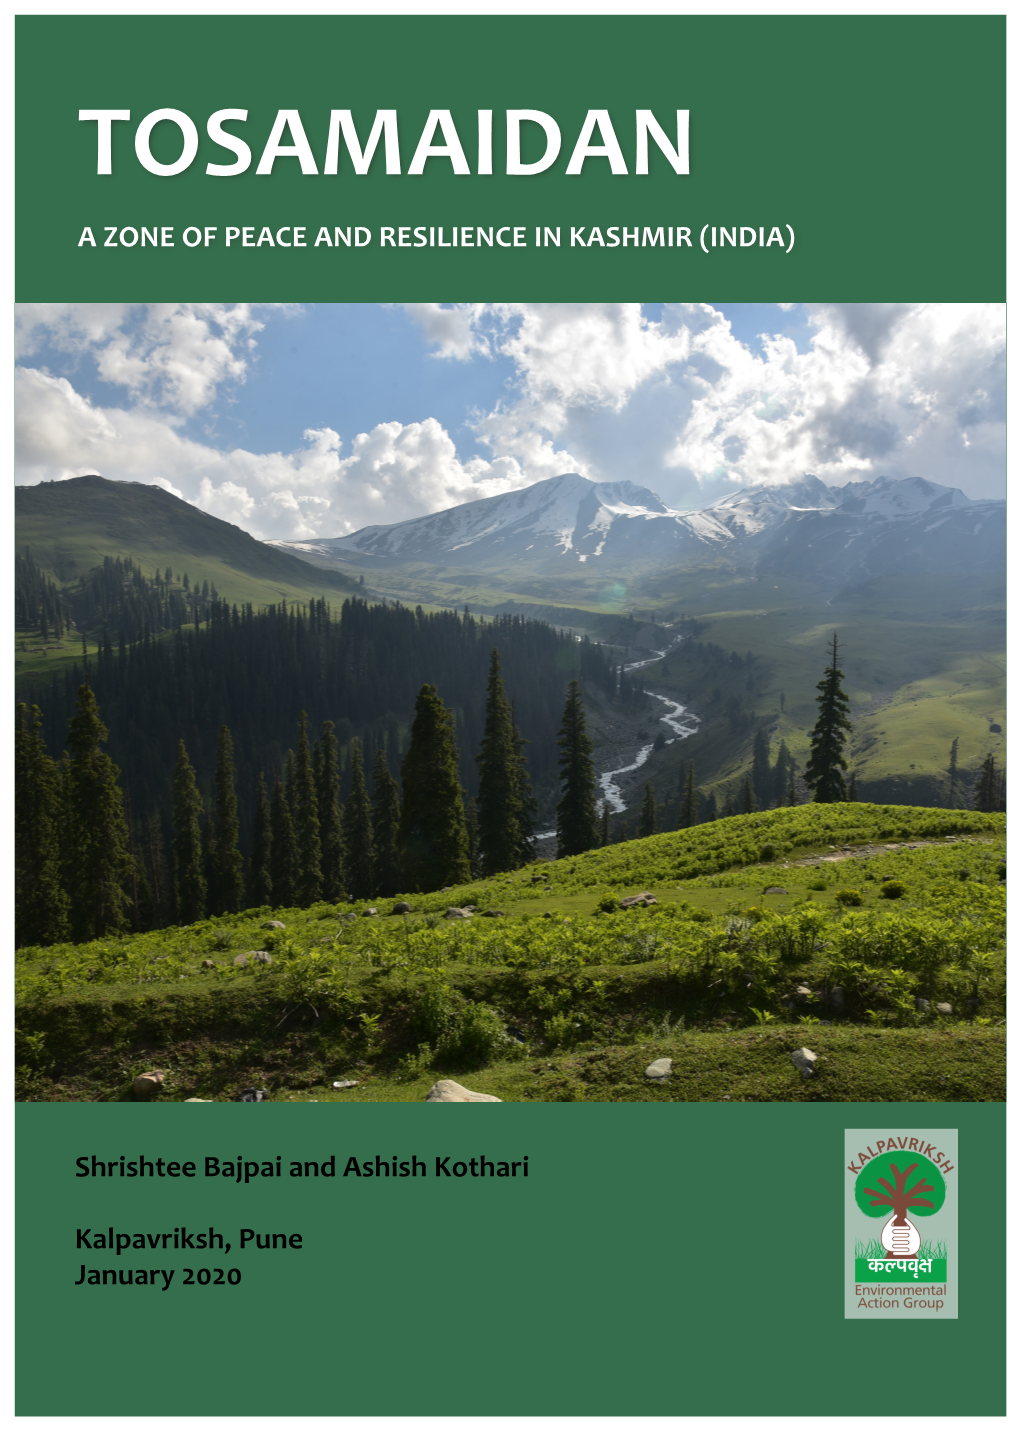 Tosamaidan a Zone of Peace and Resilience in Kashmir (India)